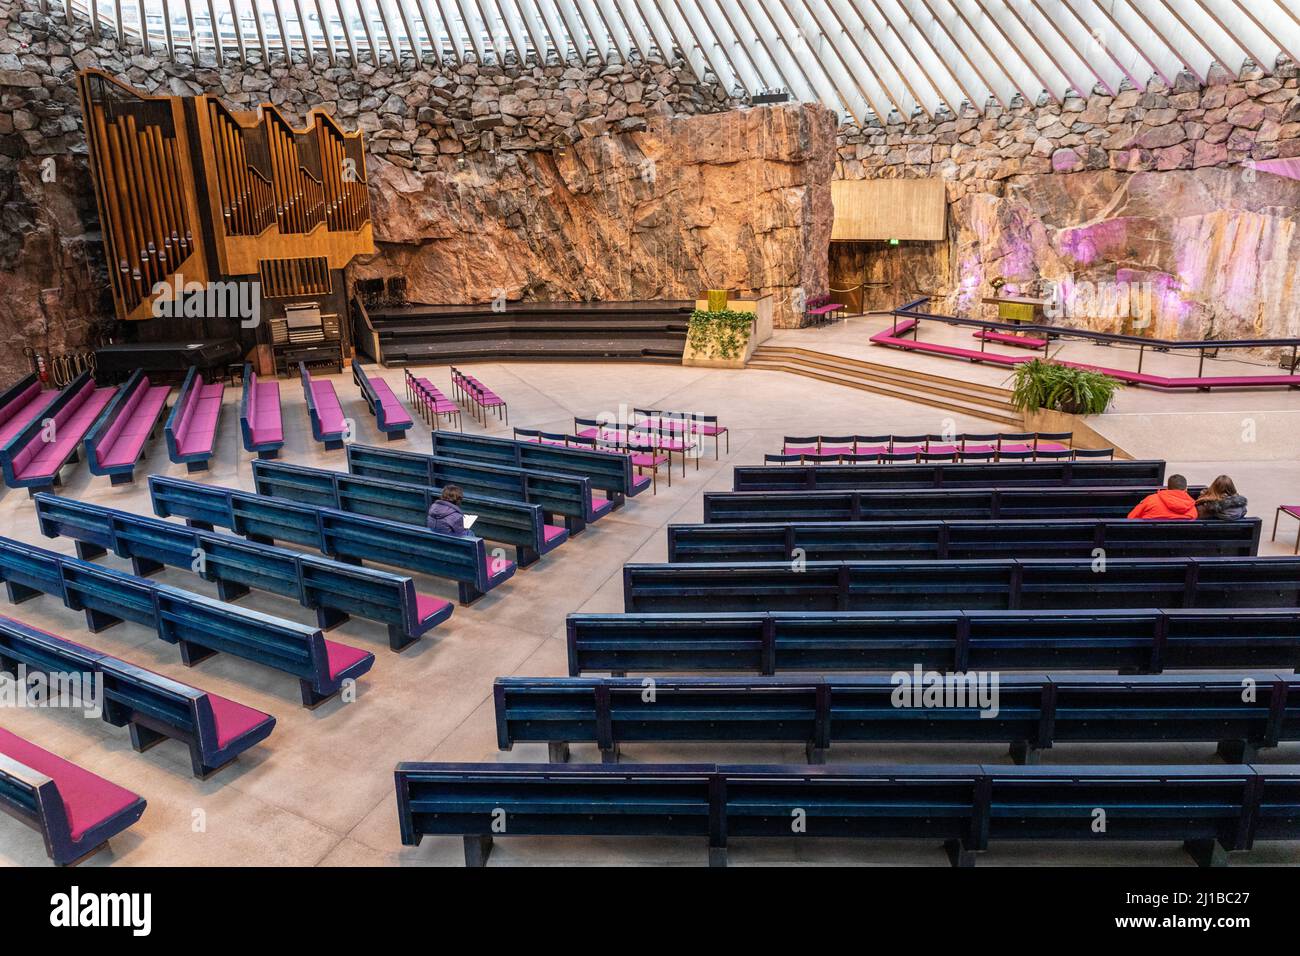 TEMPPELIAUKIO CHURCH, MONOLITHIC UNDERGROUND CHURCH TOPPED BY A COPPER CUPOLA,  HELSINKI, FINLAND, EUROPE Stock Photo